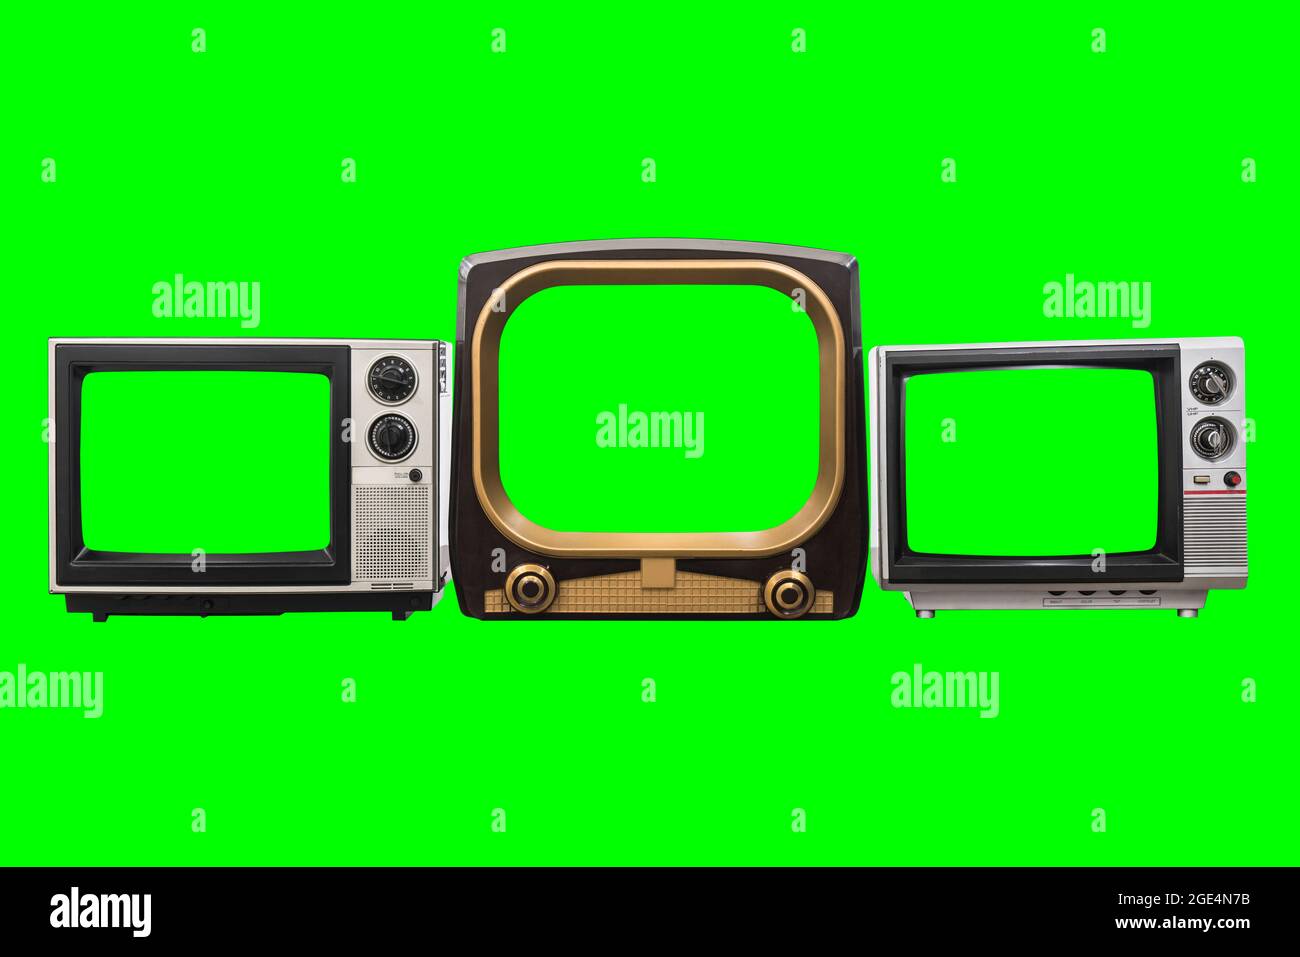 Three old vintage televisions isolated with chroma key green screens and background. Stock Photo